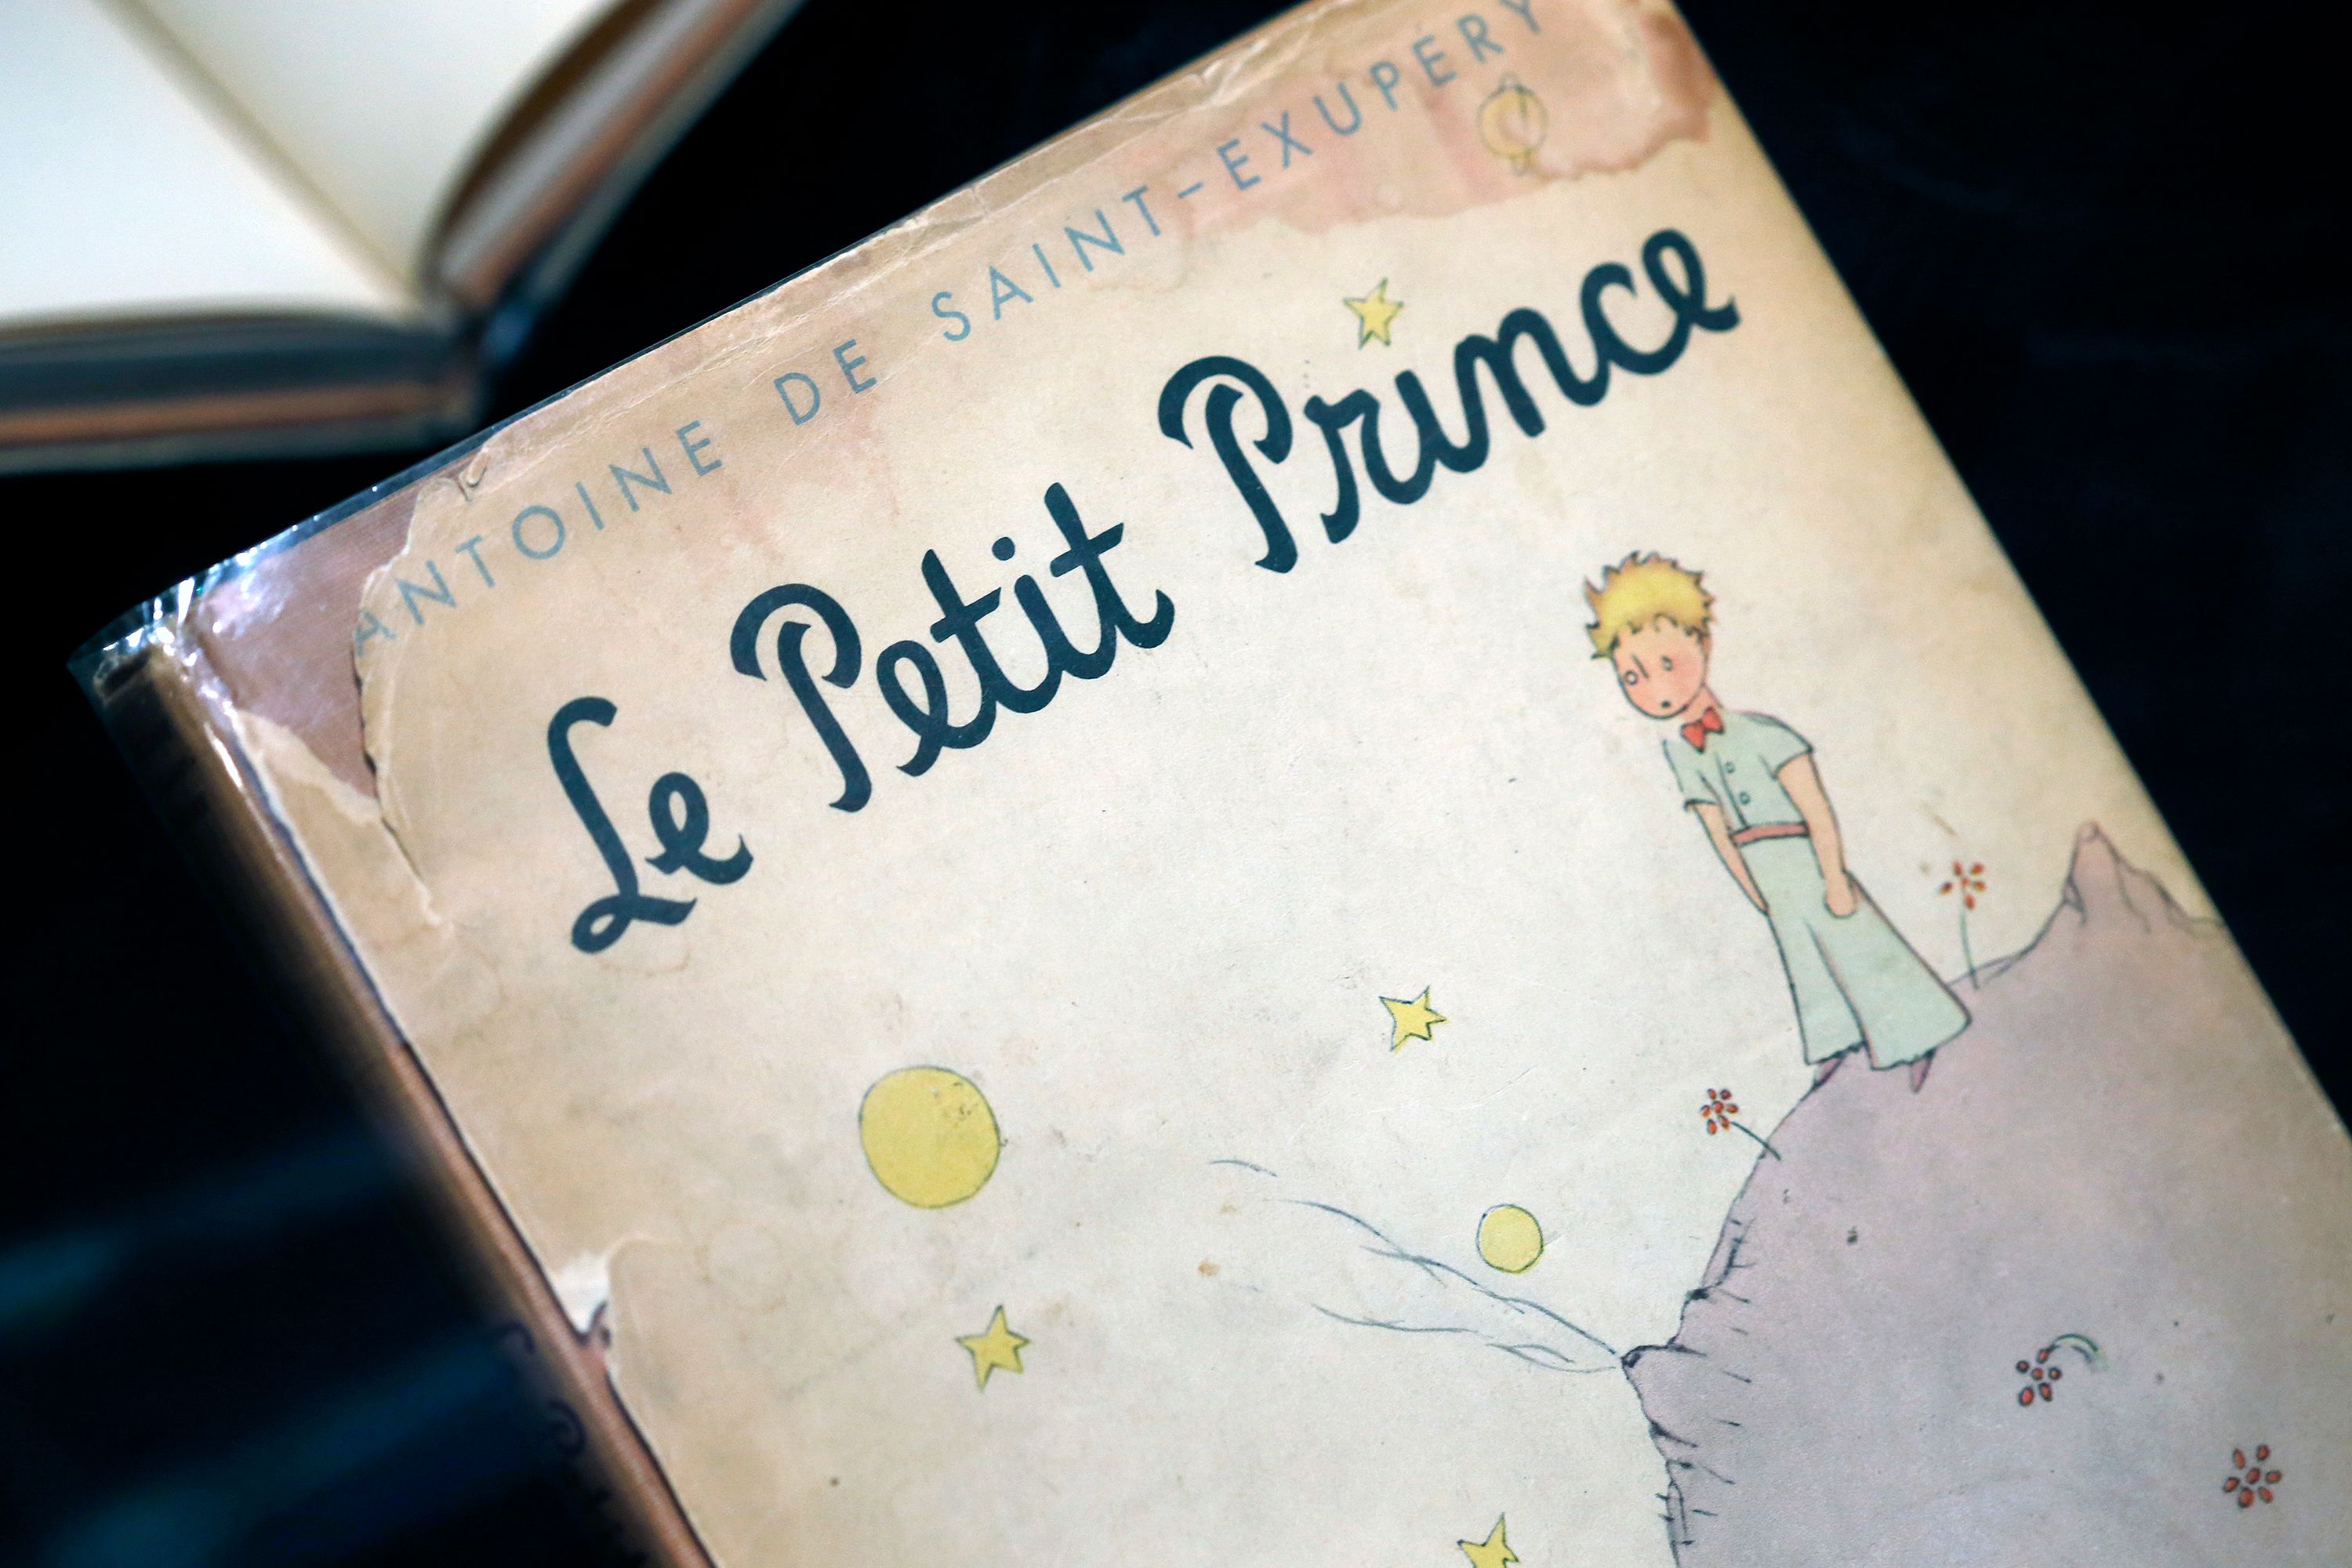 an encounter with the petit prince: original pages now on view in paris